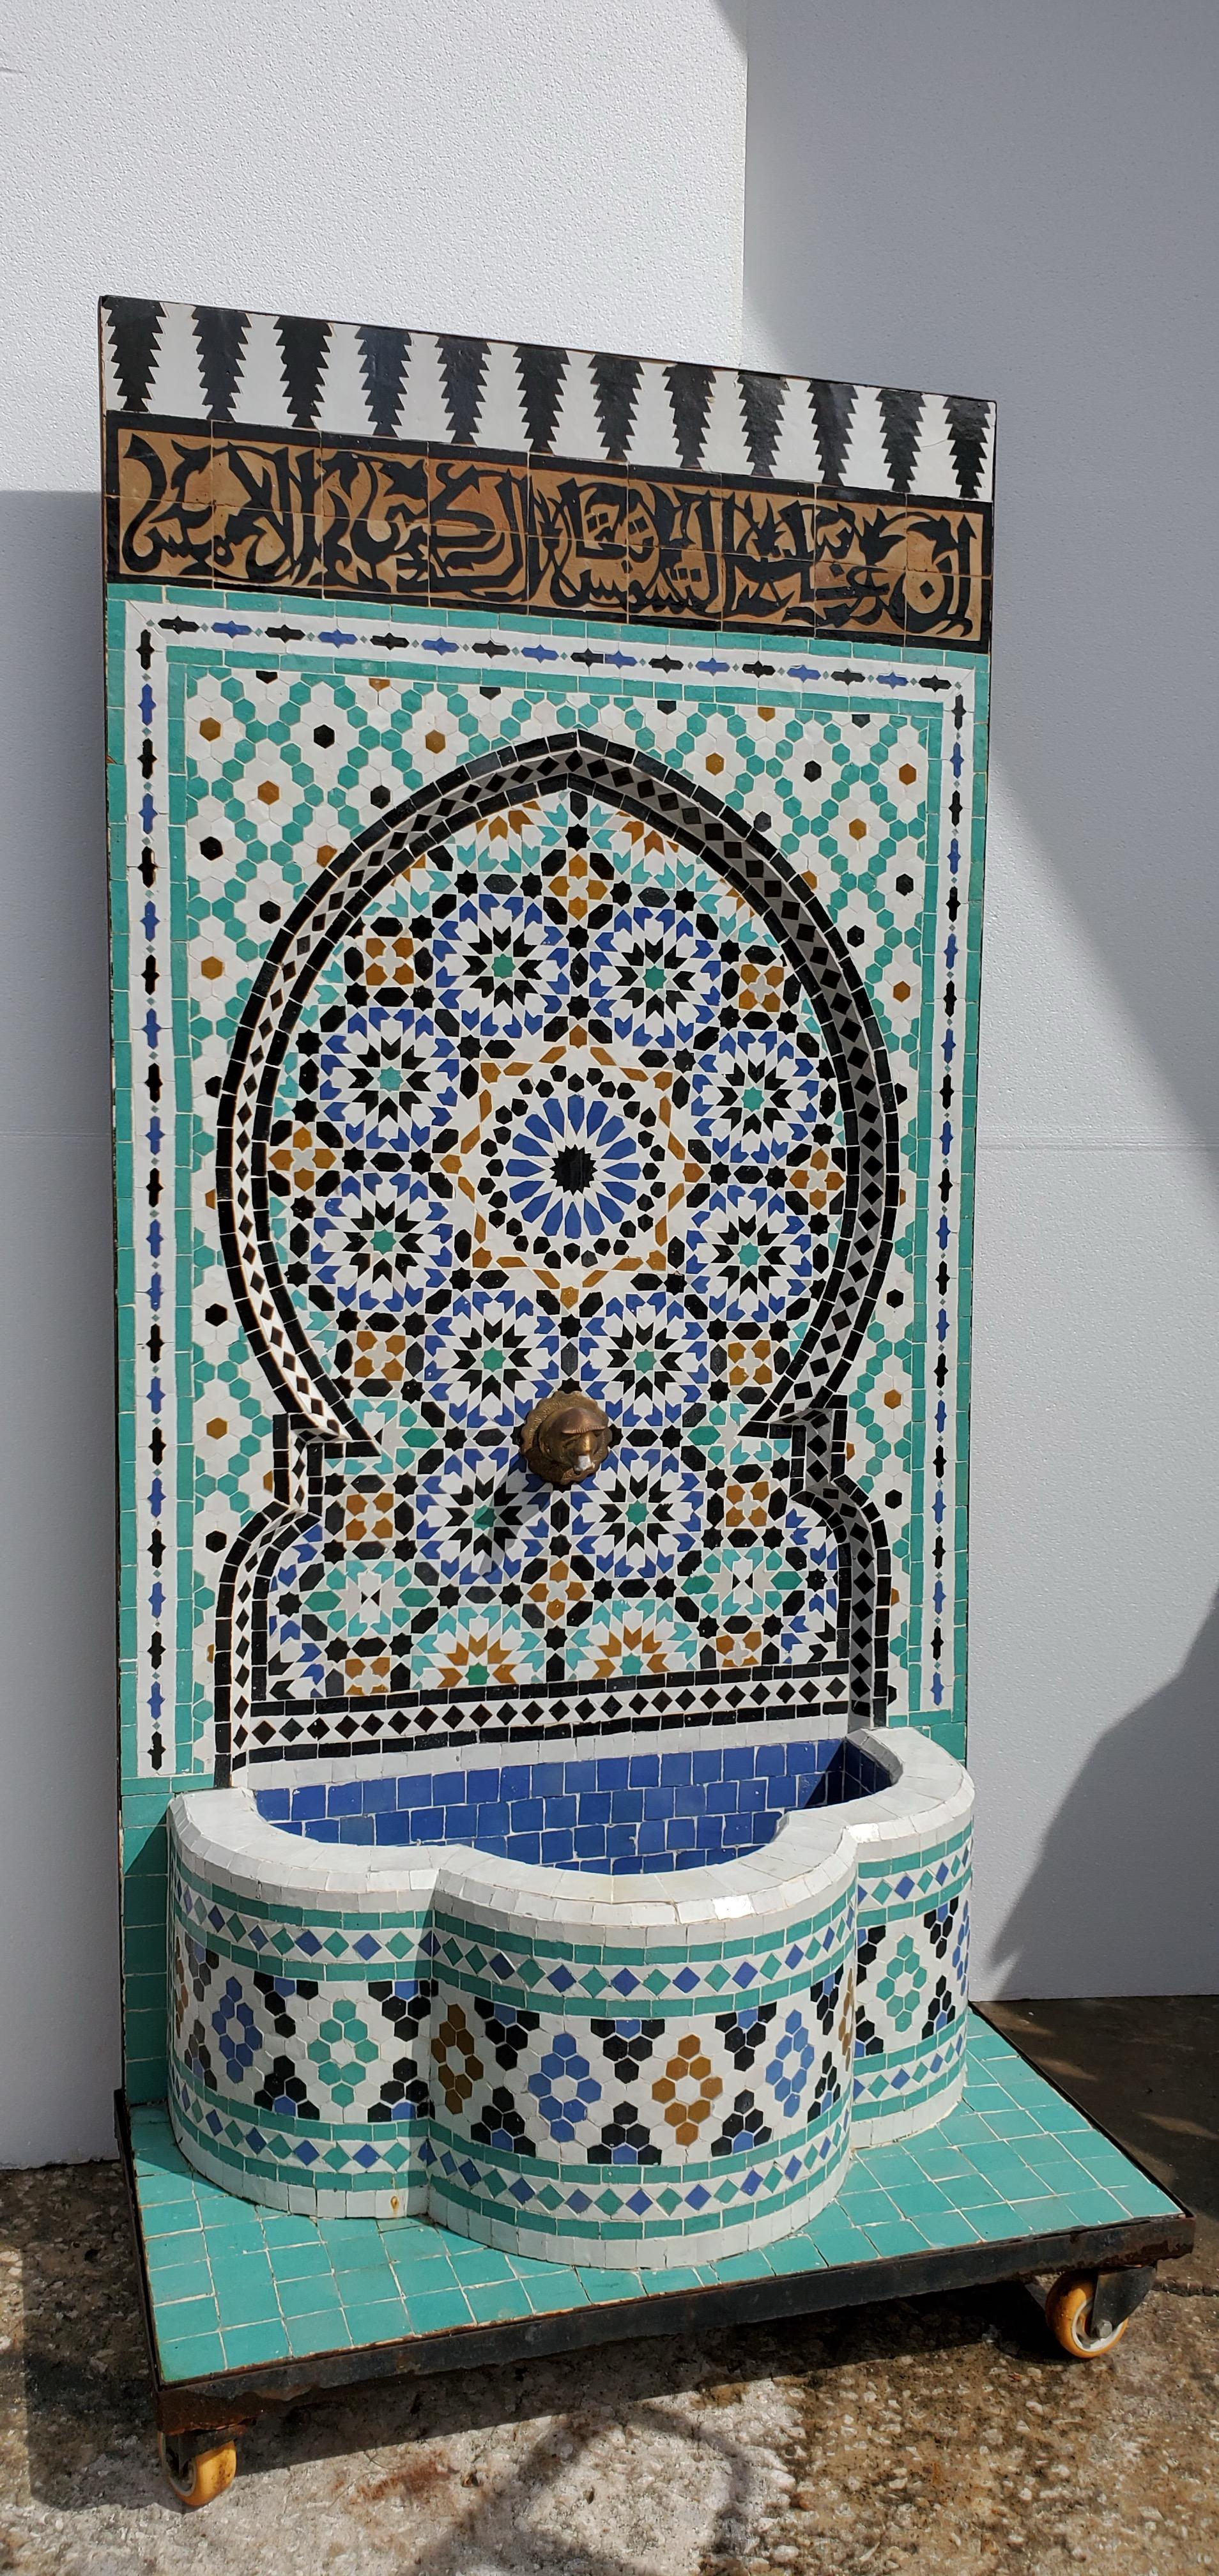 Beautiful Moroccan Moorish Fountain with carved Arabic calligraphy.
This is a custom piece designed with inspiration from the famous Andalusia in Spain.
Dimensions: 19 D x W 35.25 x H 68.38 without the wells.